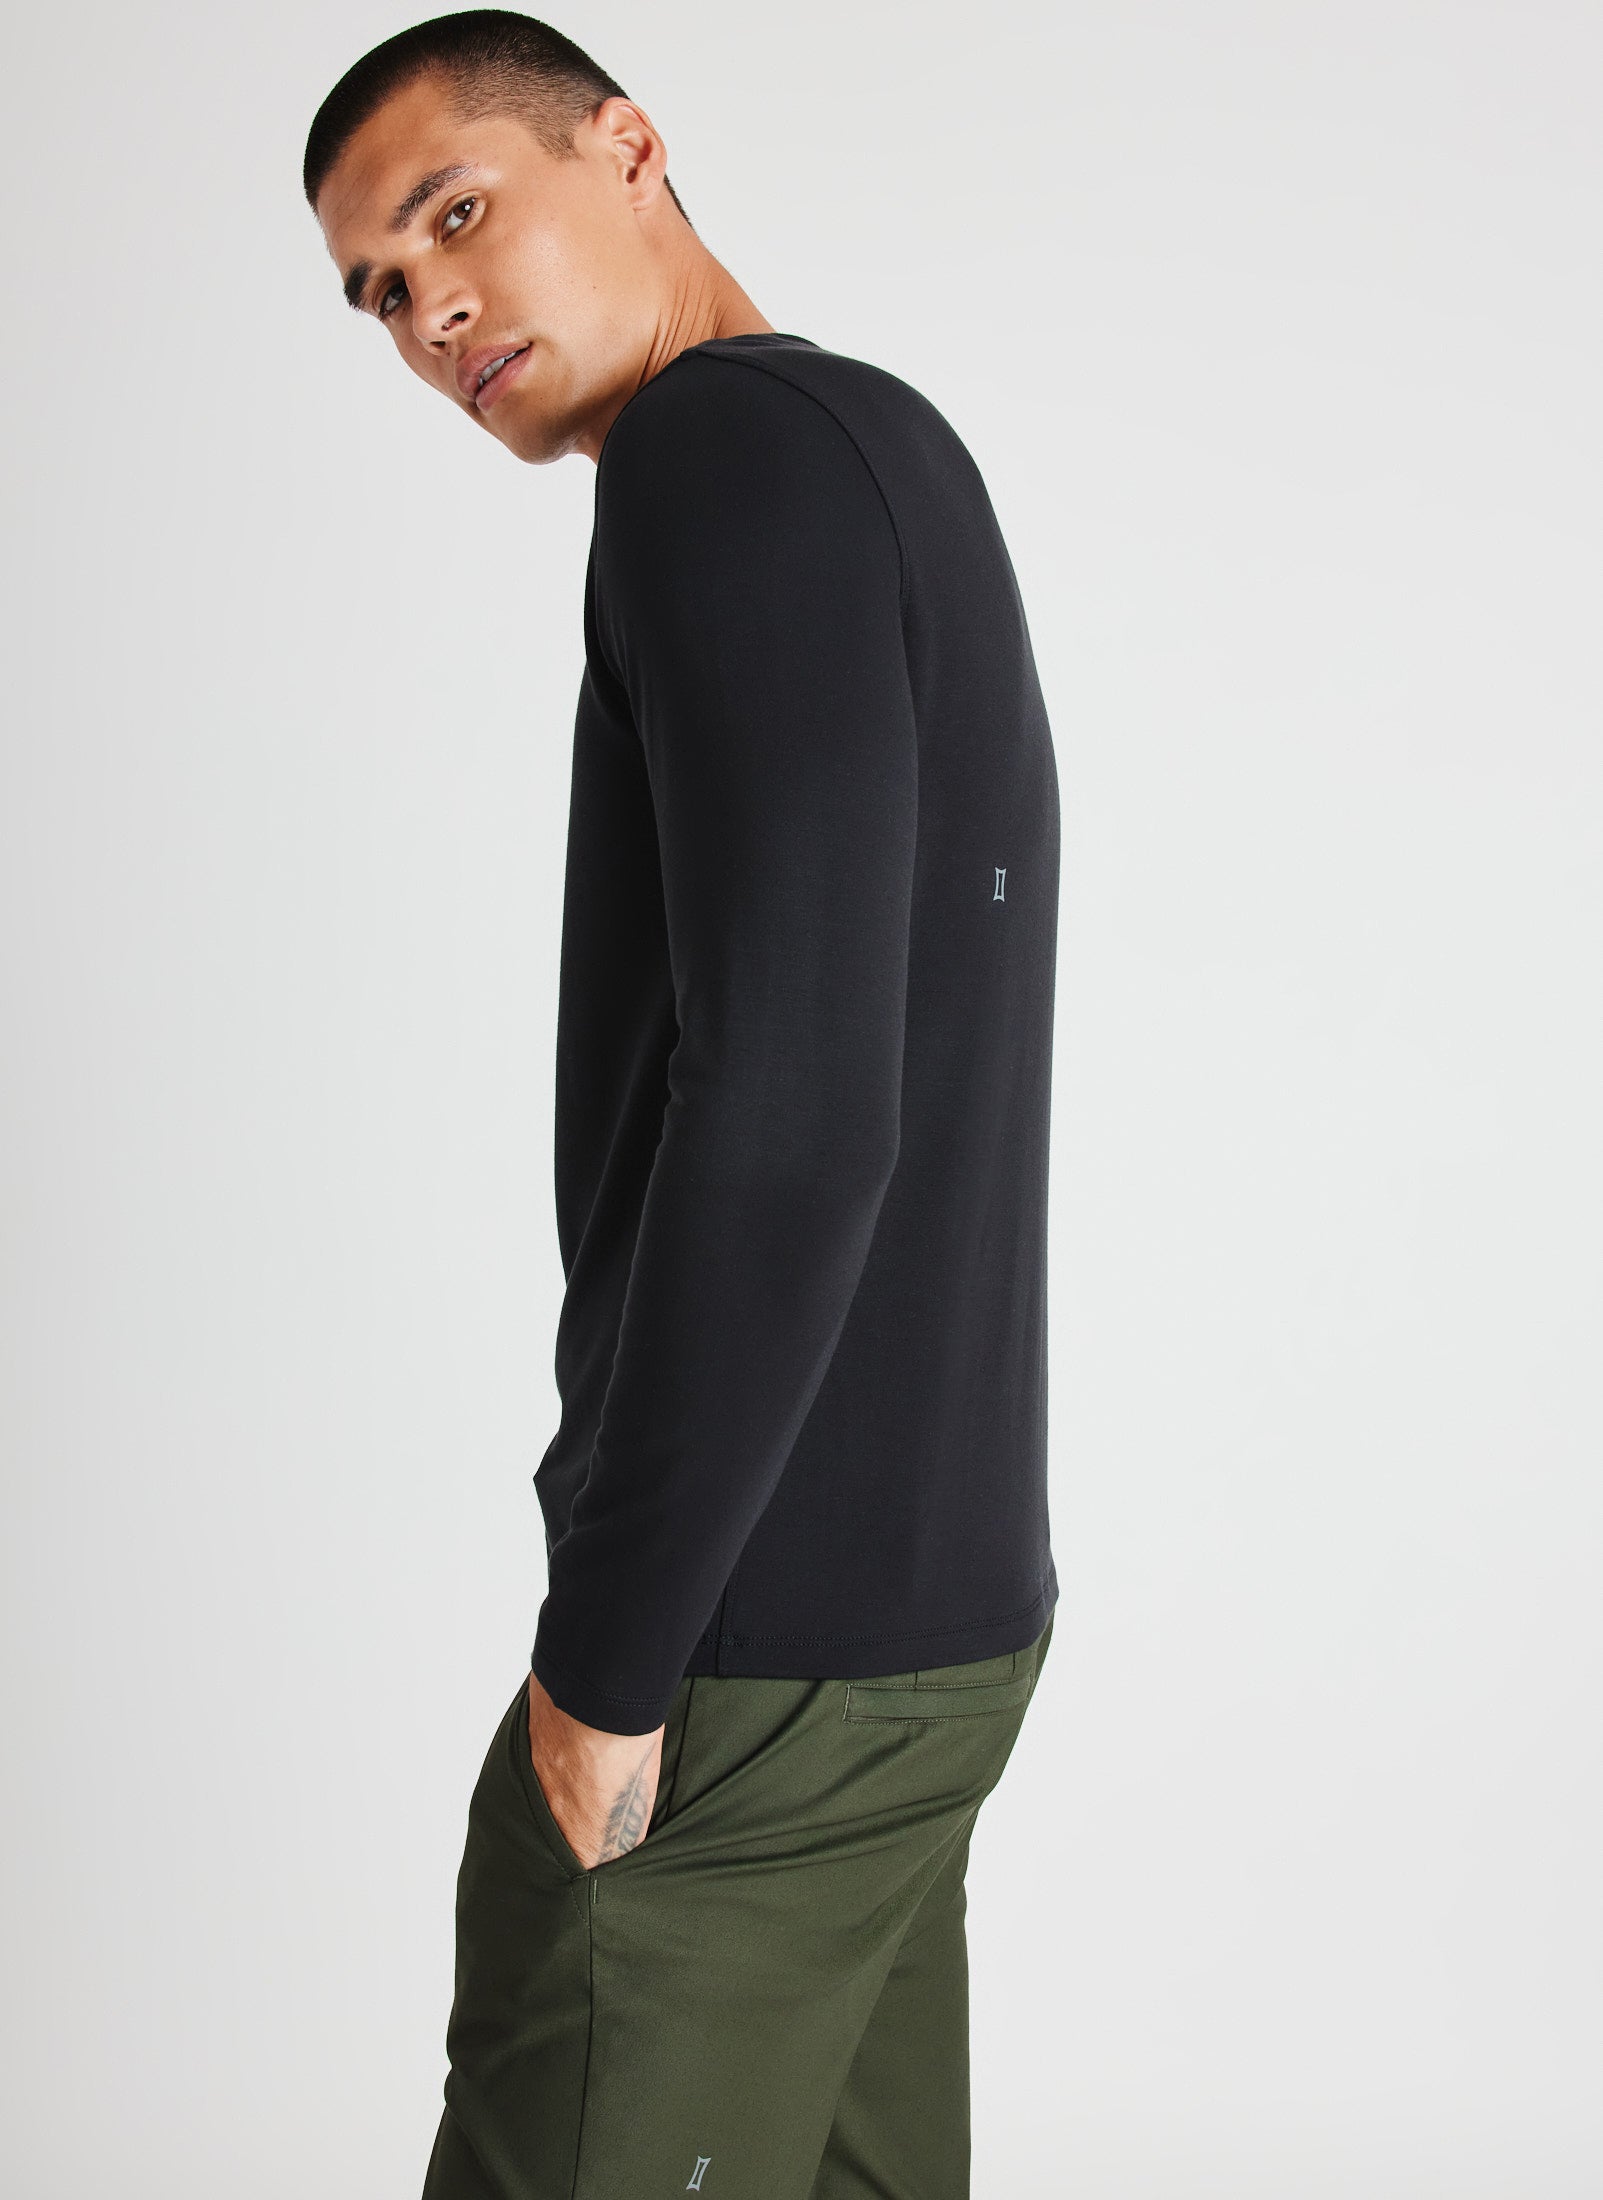 Kit and Ace — Upgraded Long Sleeve Henley Tee